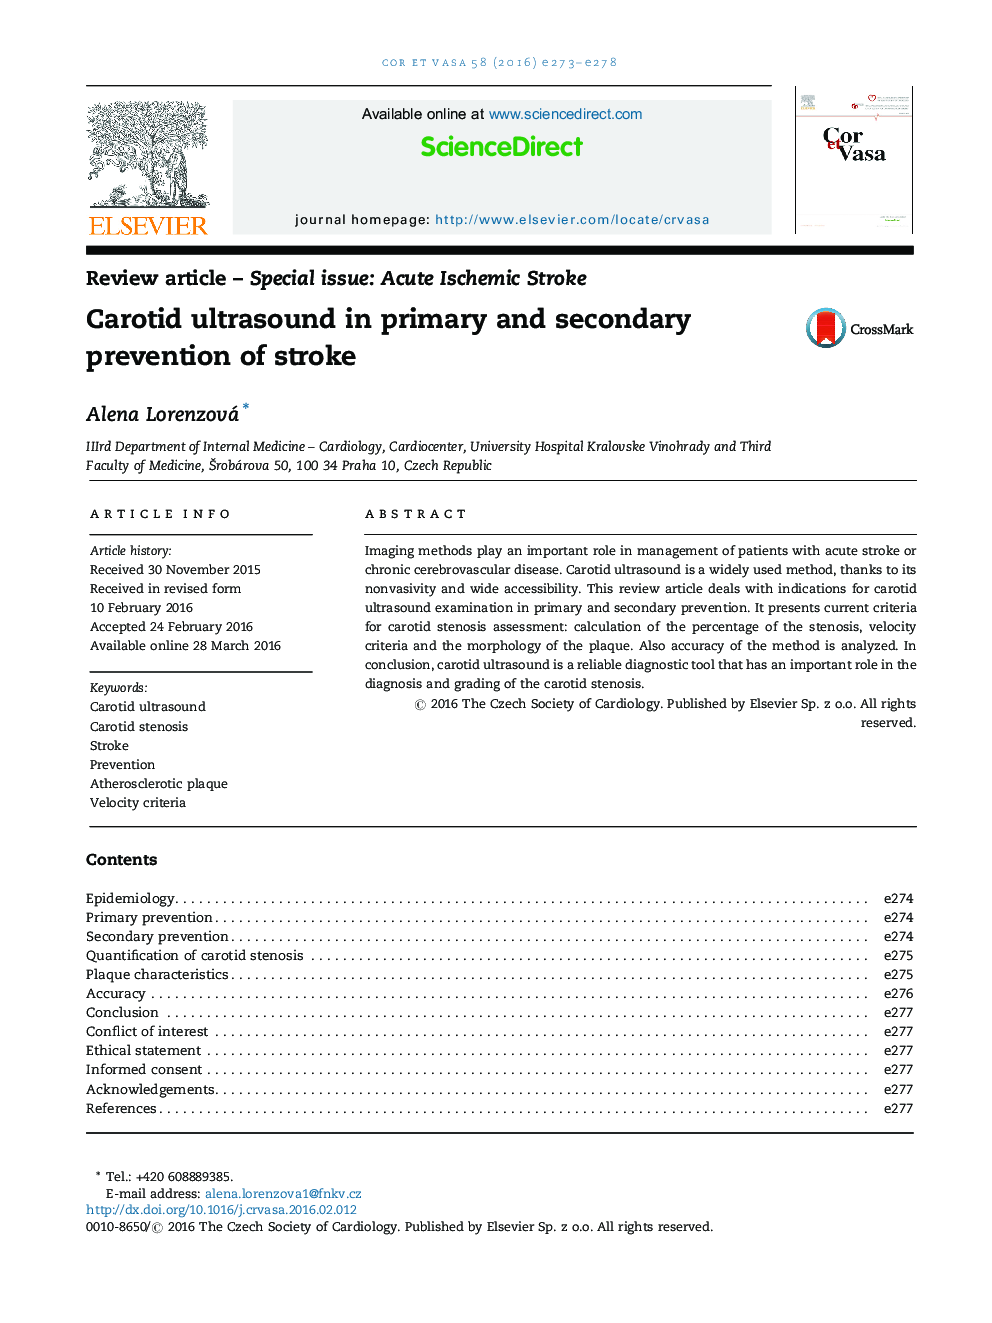 Carotid ultrasound in primary and secondary prevention of stroke